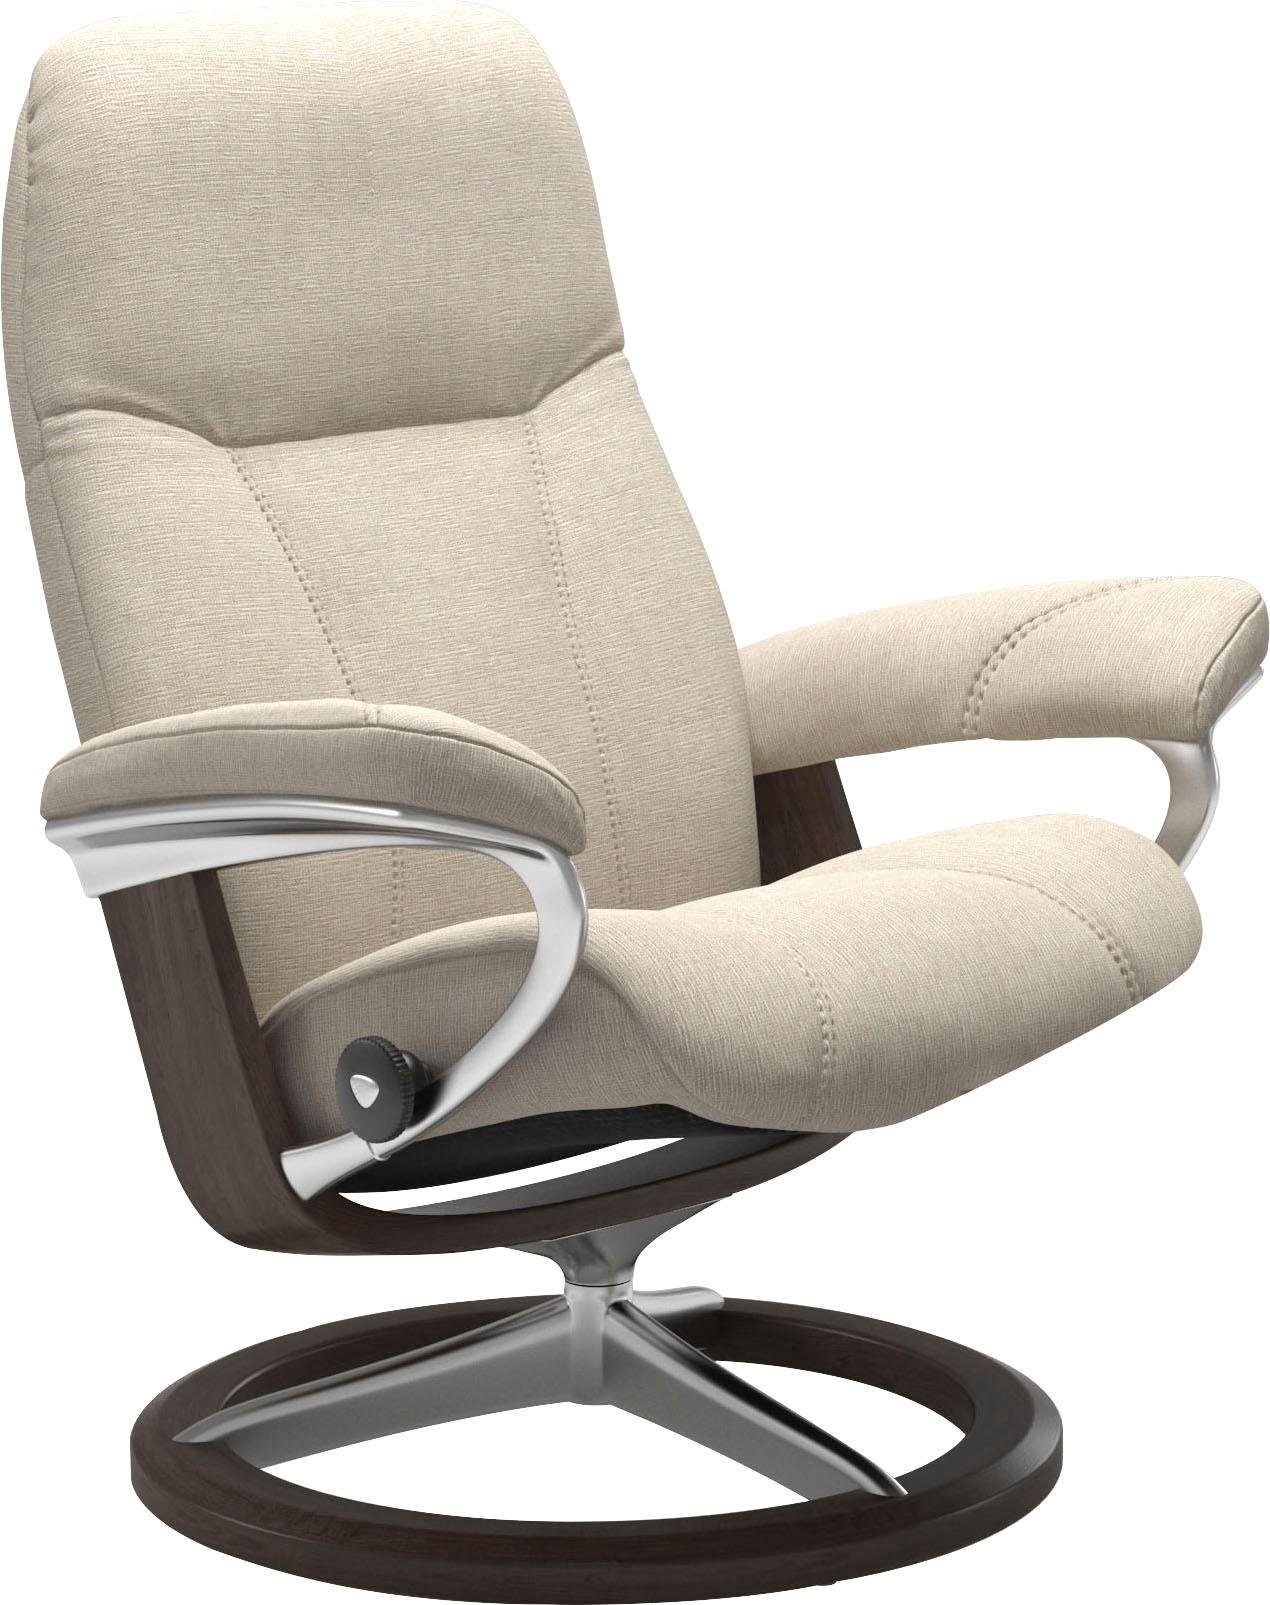 Stressless® Relaxsessel L, mit Wenge Größe Signature Gestell Base, Consul